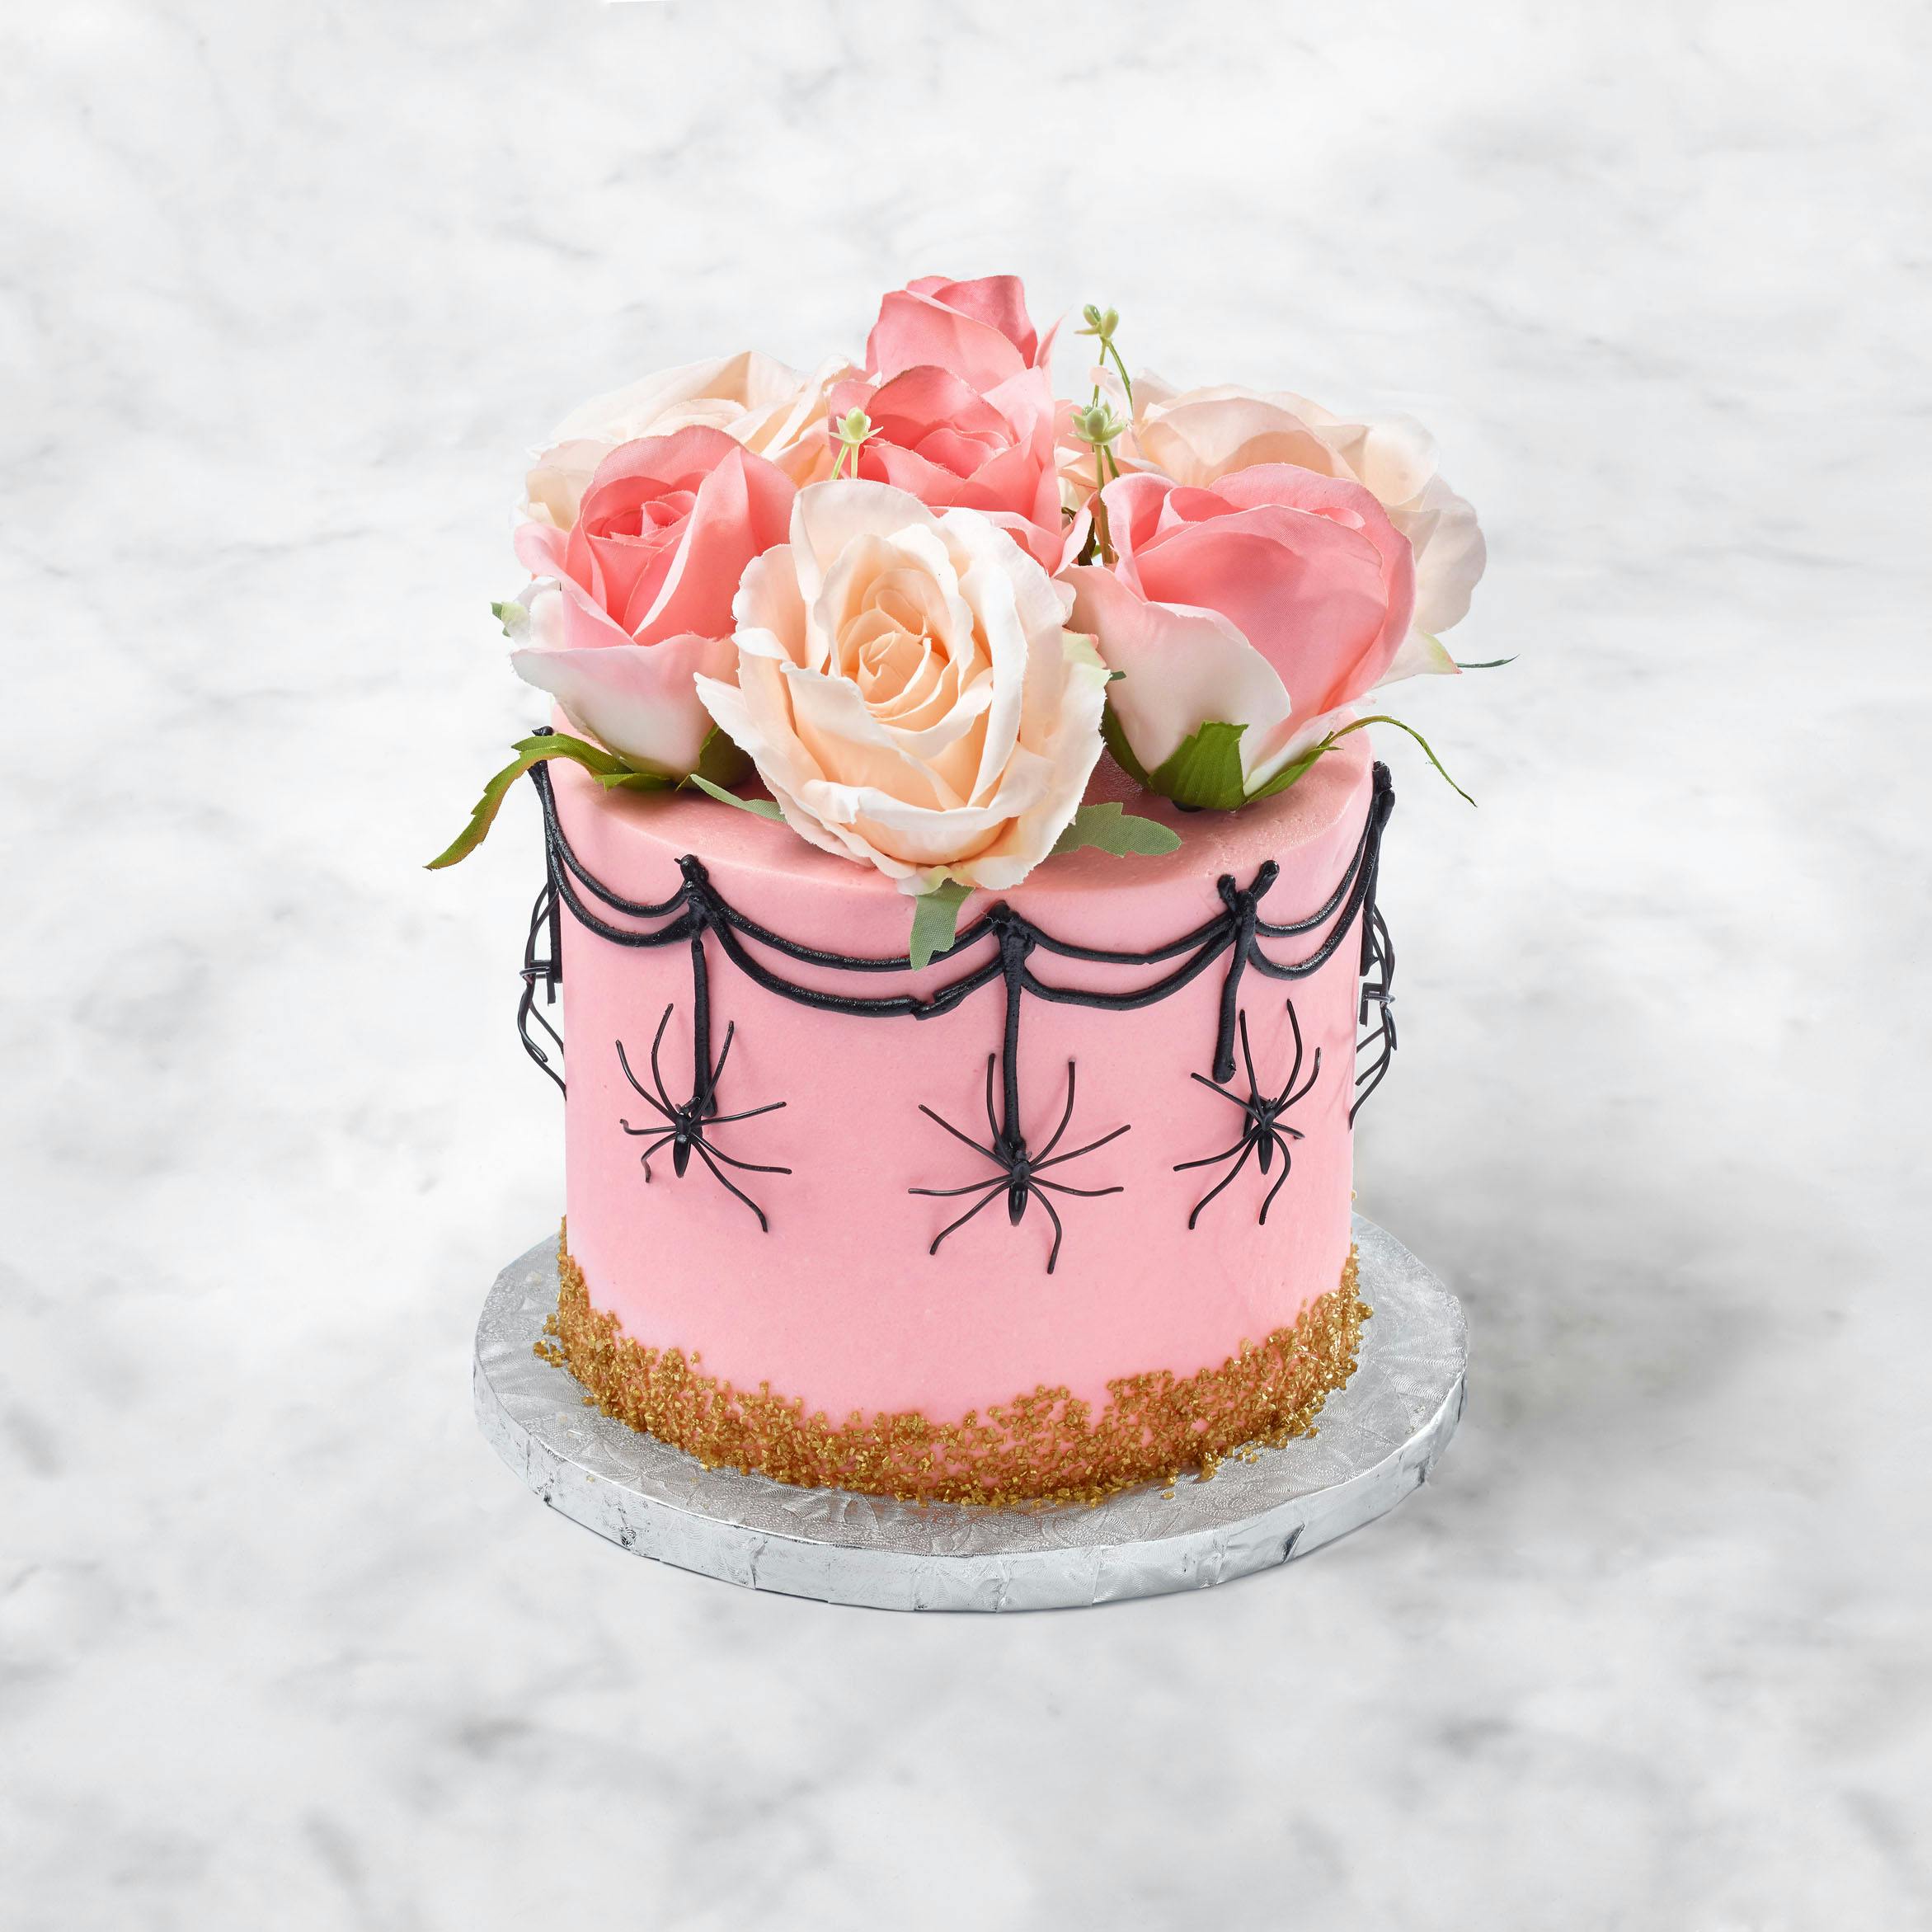 Best Friends For Frosting by Melissa Johnson - This vanilla cake with vanilla  frosting is so easy to make and elegant for any party! 🎂 Sharing recipe  here! https://bestfriendsforfrosting.com/vanilla-cake-frosting-recipe/ |  Facebook